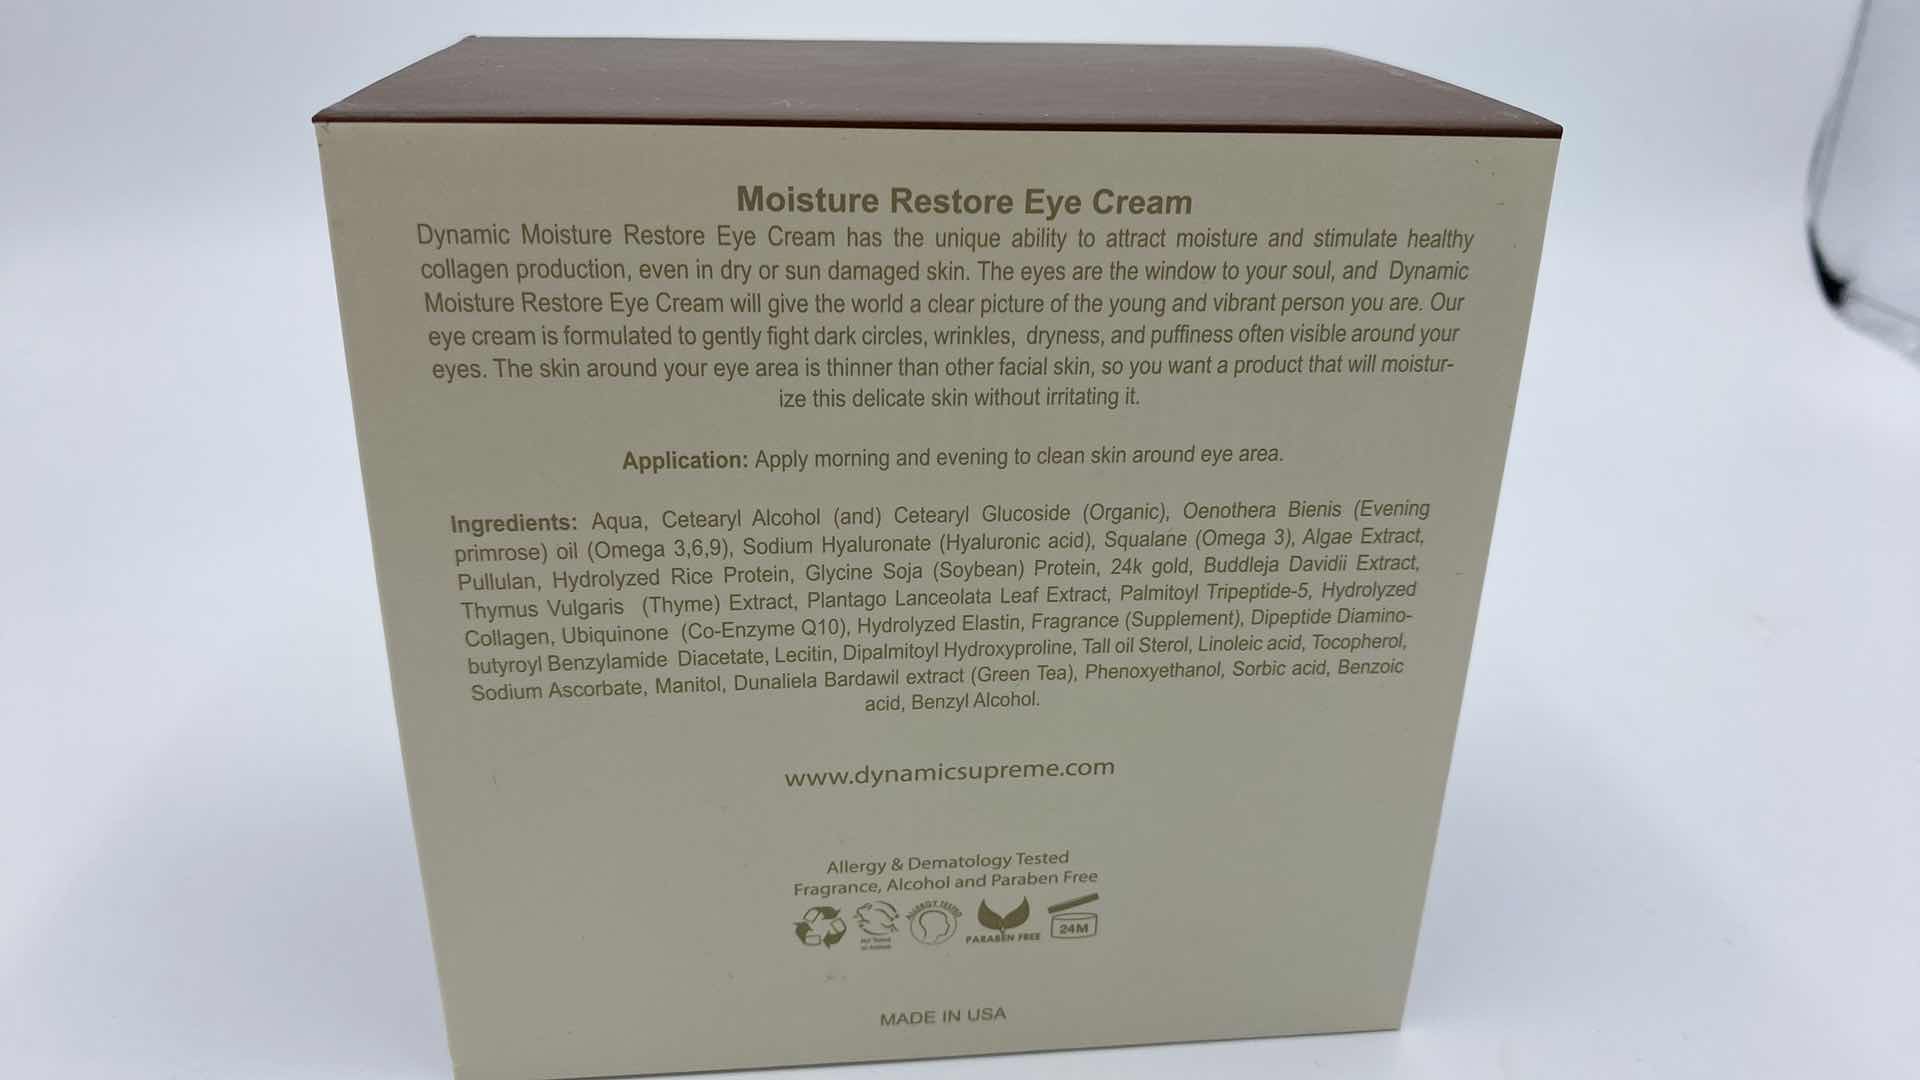 Photo 3 of NEW - DYNAMIC SUPREME MOISTURE RESTORE EYE CREAM ATTRACTS MOISTURE AND STIMULATES HEALTHY COLLAGEN PRODUCTION